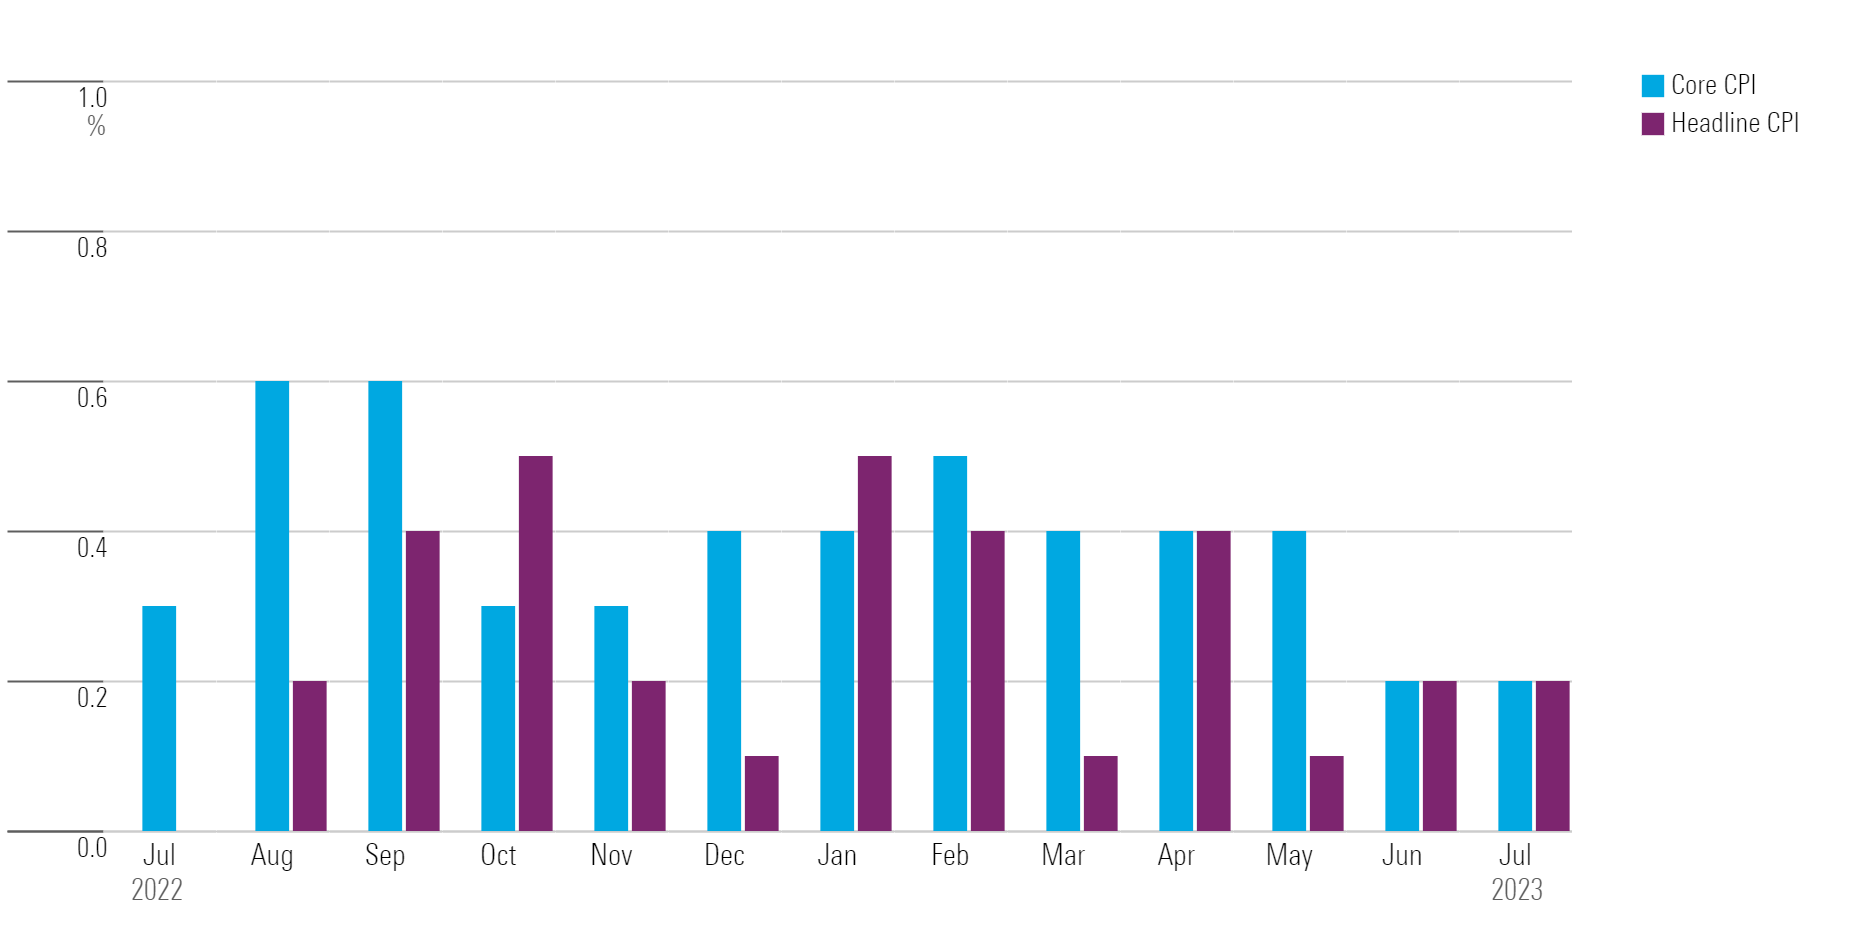 Bar chart showing month-over-month changes in core and headline CPI.